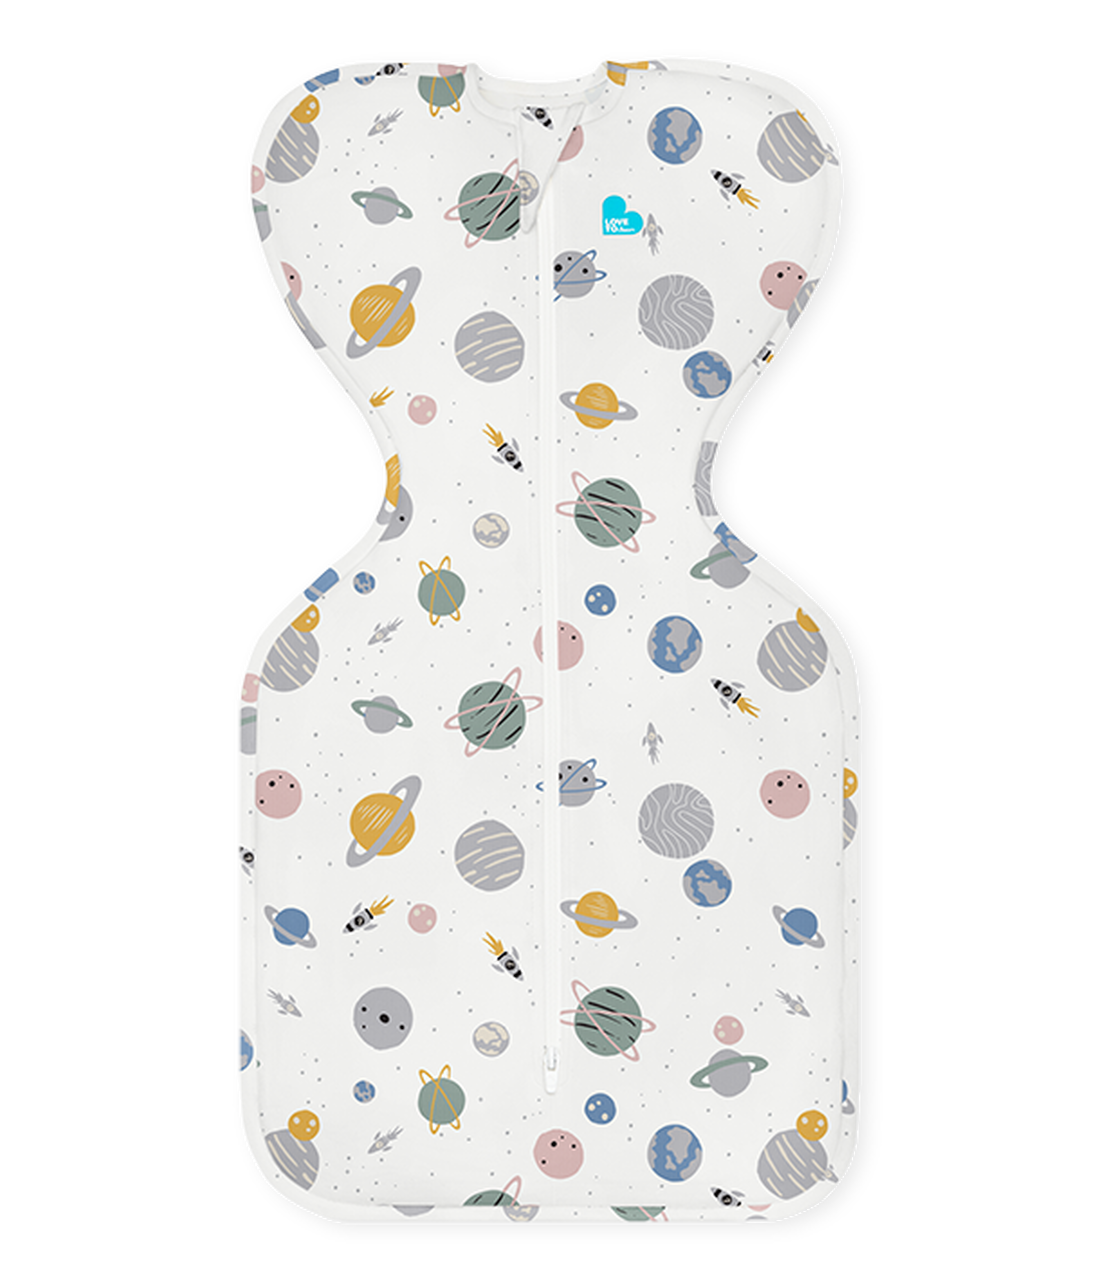 Love To Dream Love to Dream Swaddle Up™ Lite 0.2 TOG Space Print White- Designer Collection